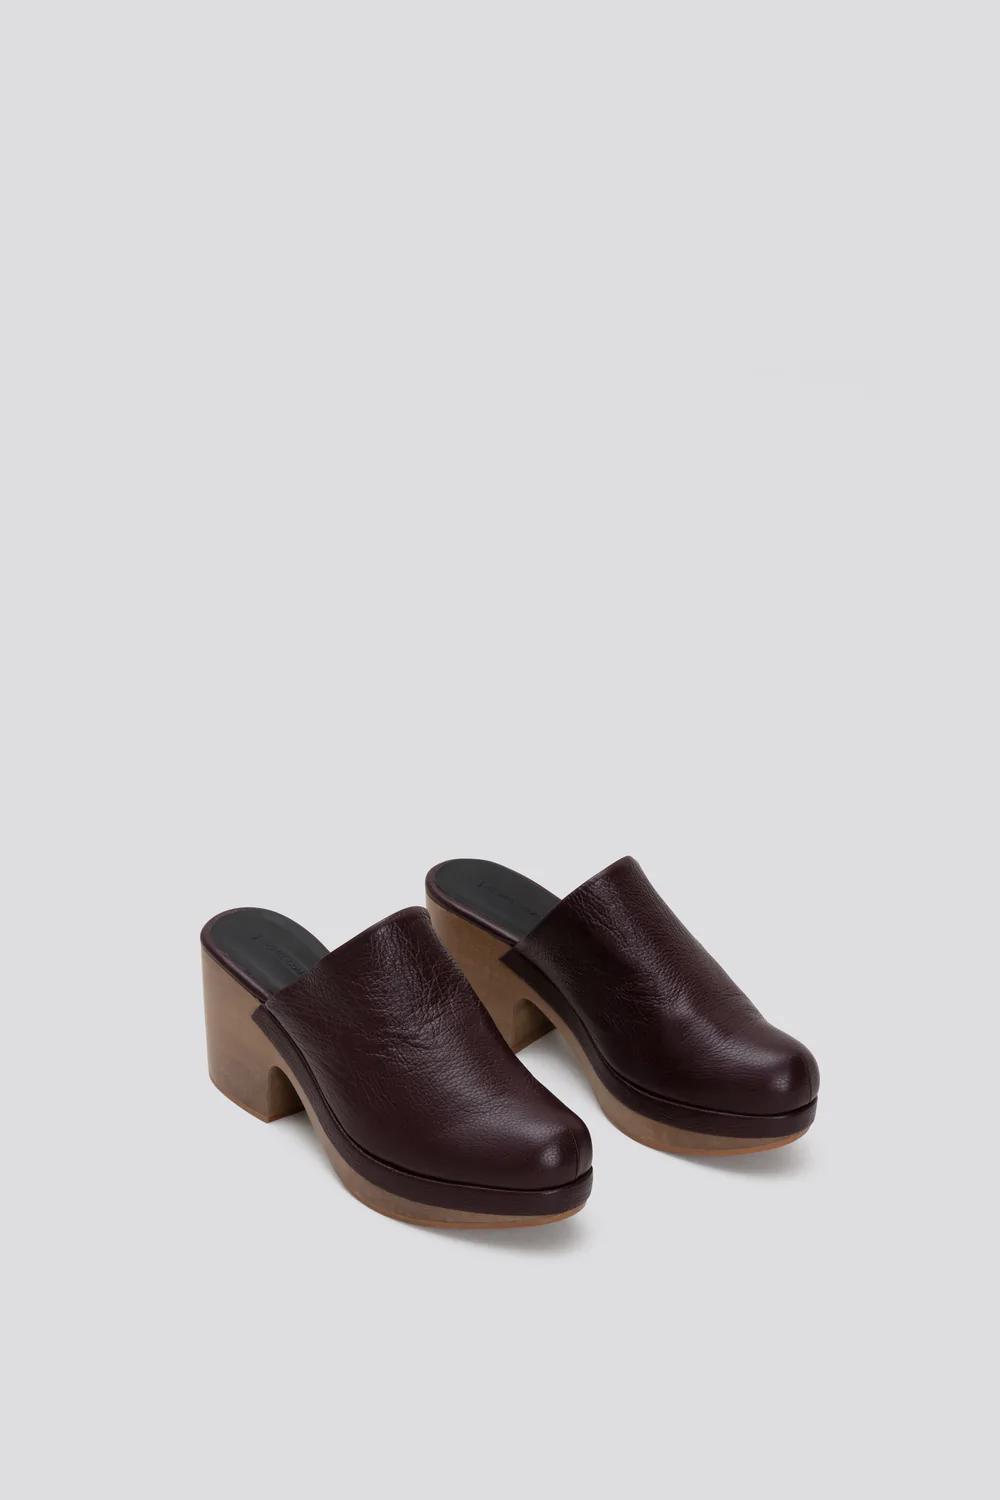 Product Image for Bose Clog, Bordeaux